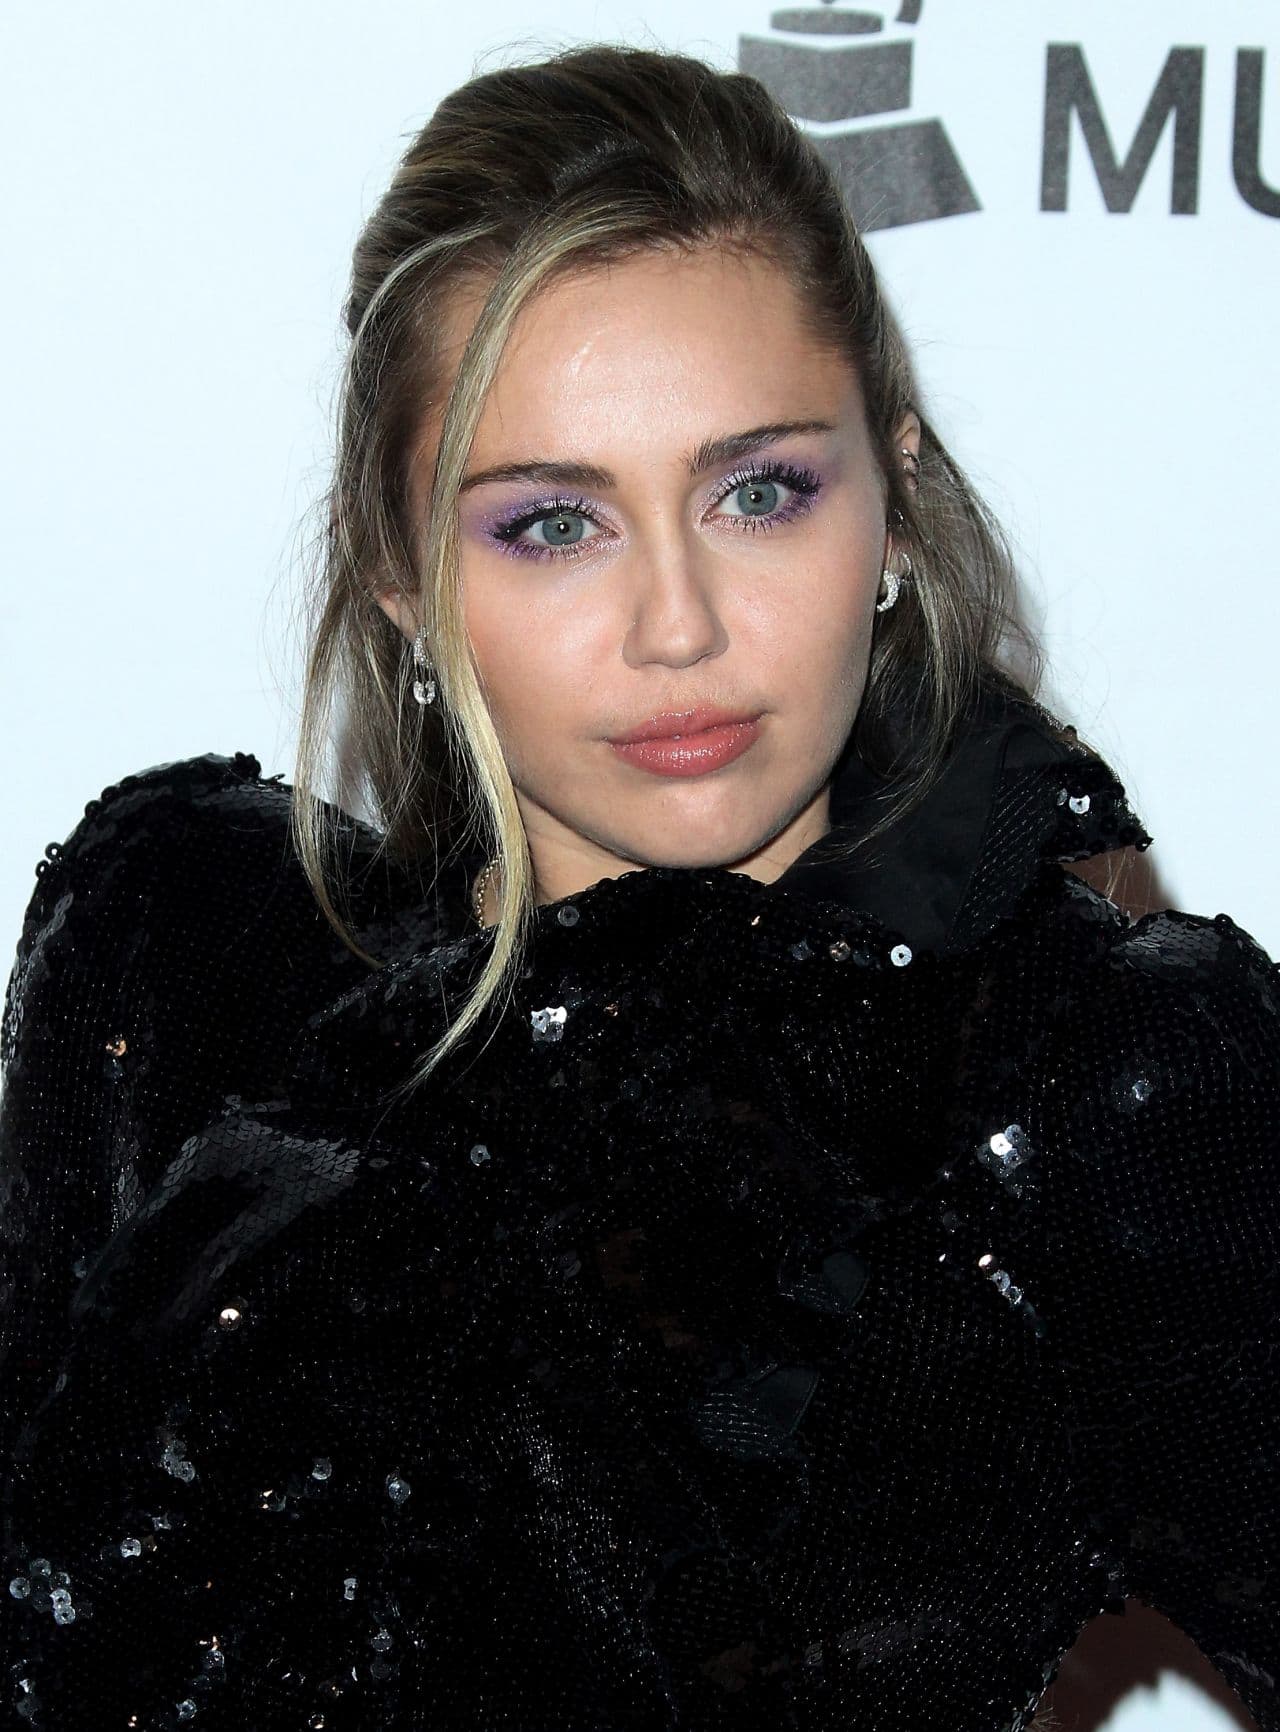 Miley Cyrus Shines in a Glamorous Little Black Dress at the MusiCares Event